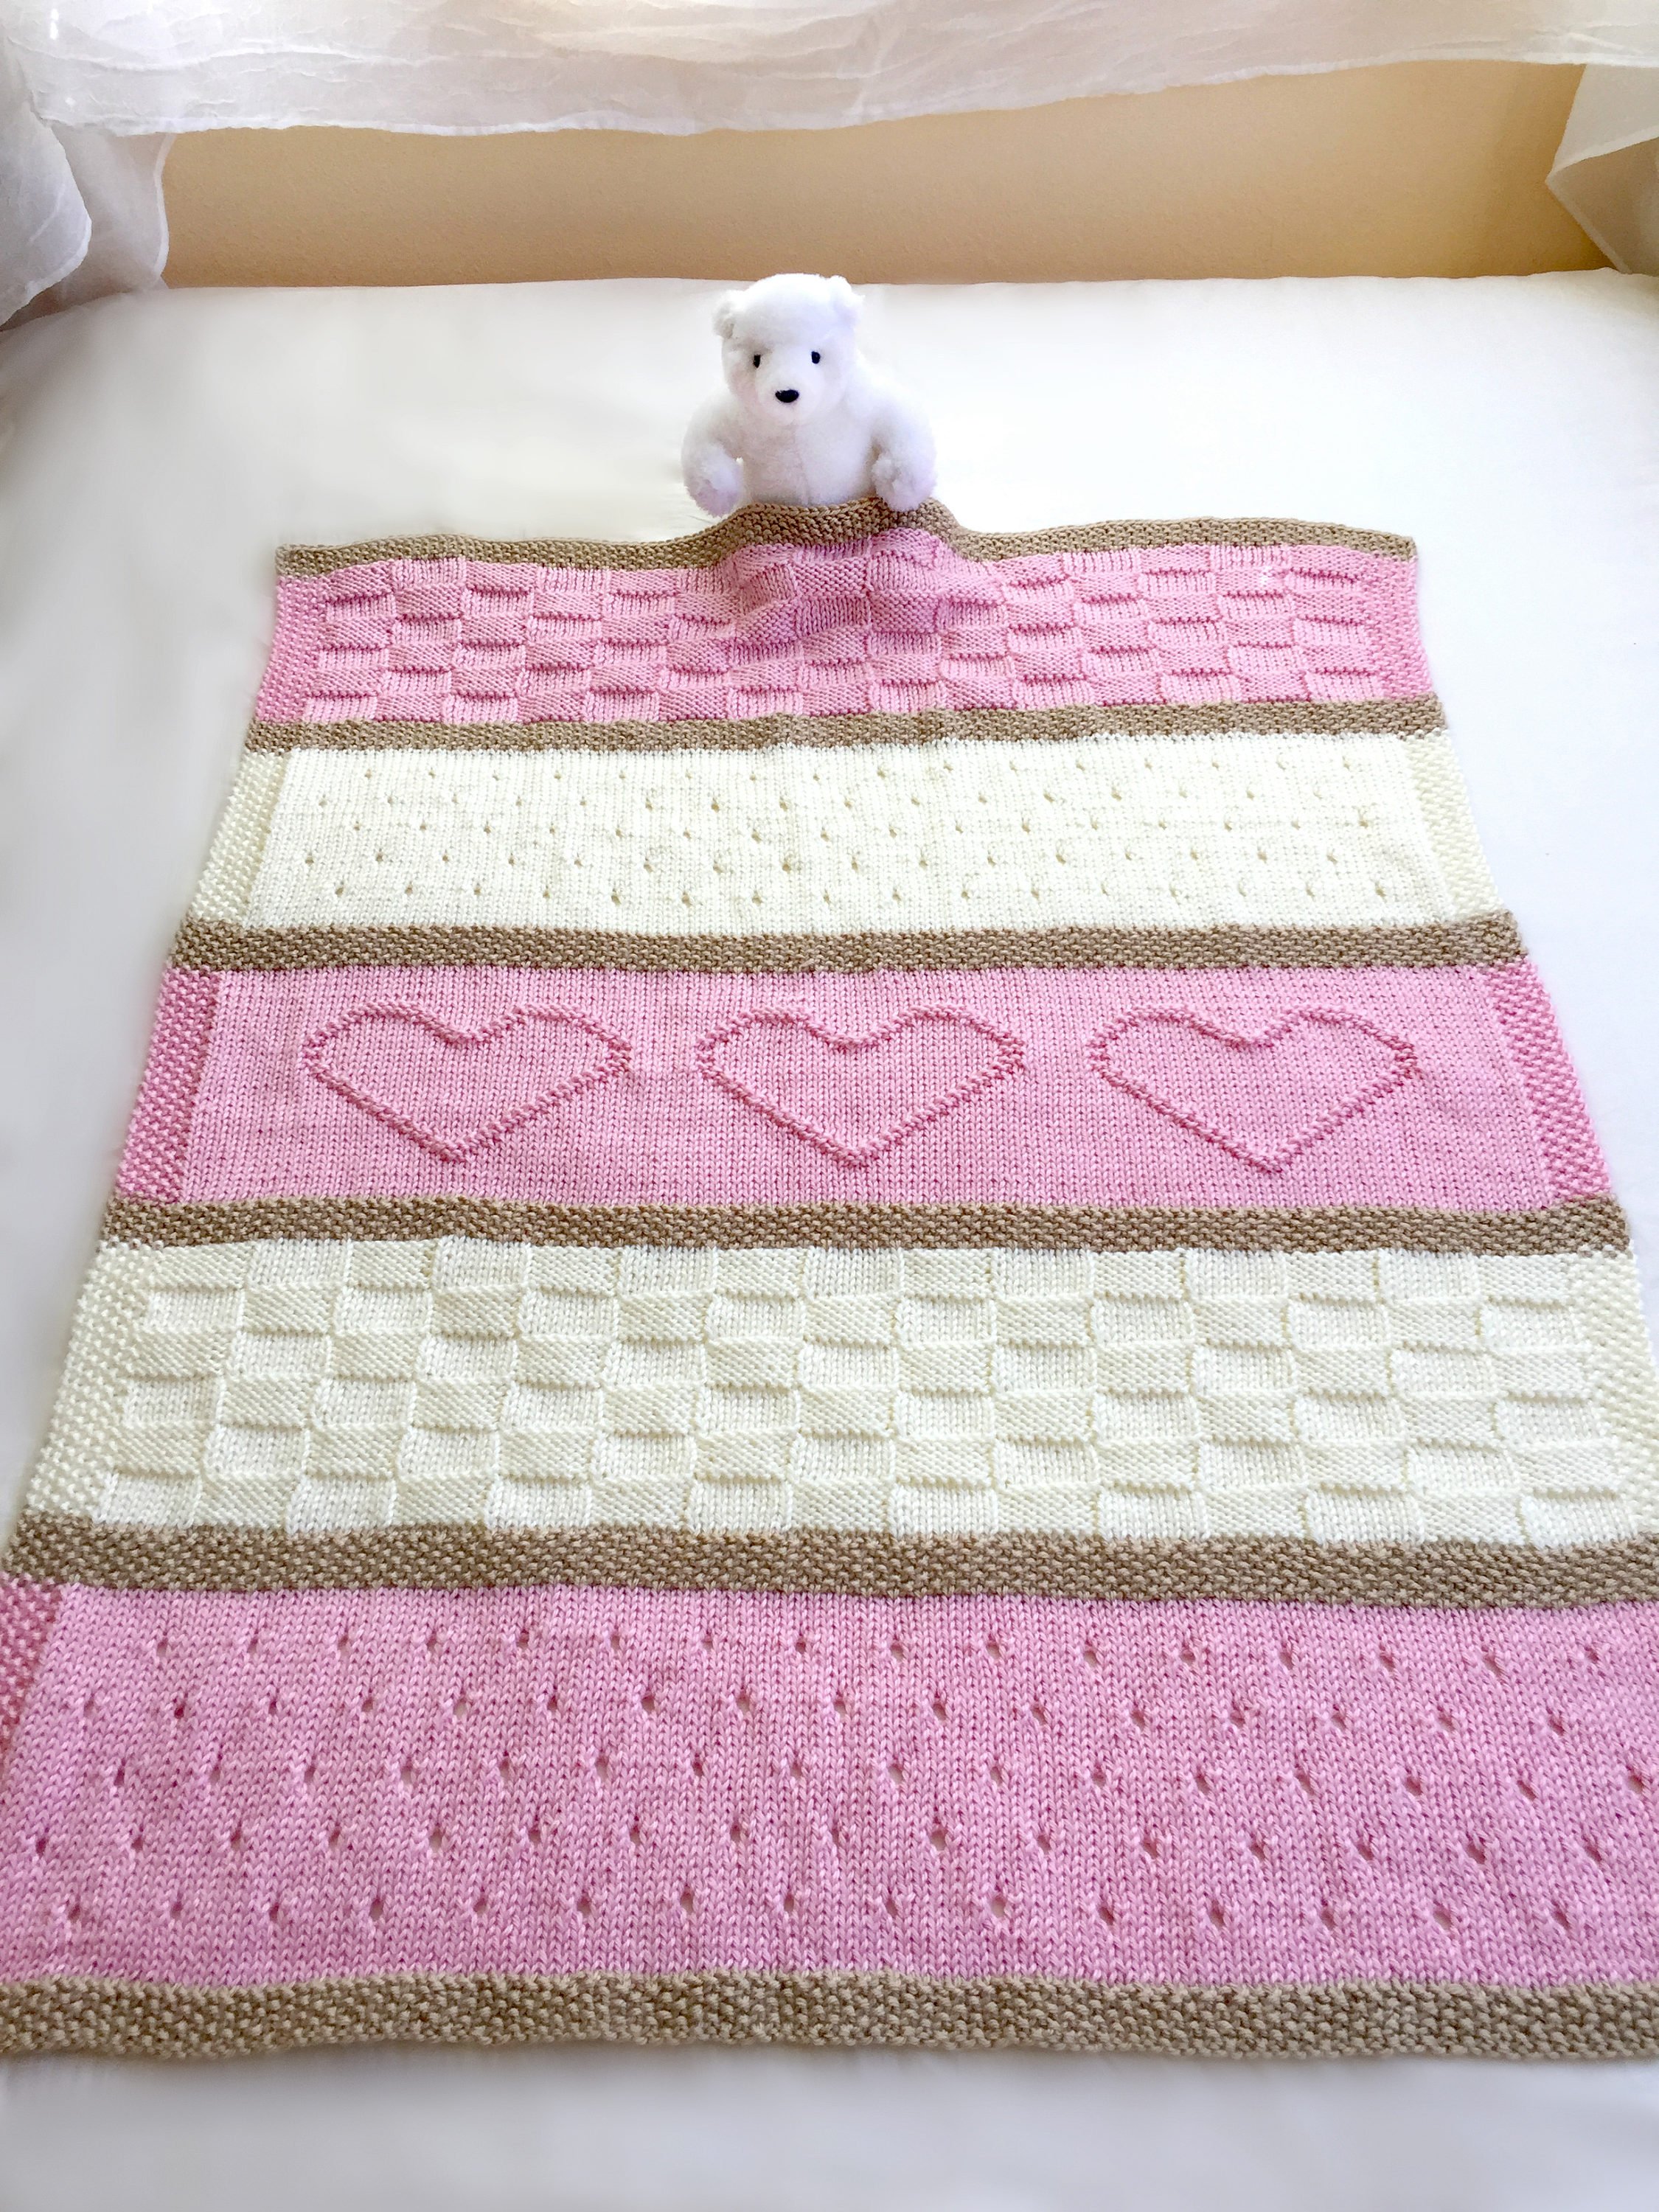 Baby Blanket Knitting Patterns - In the Loop Knitting